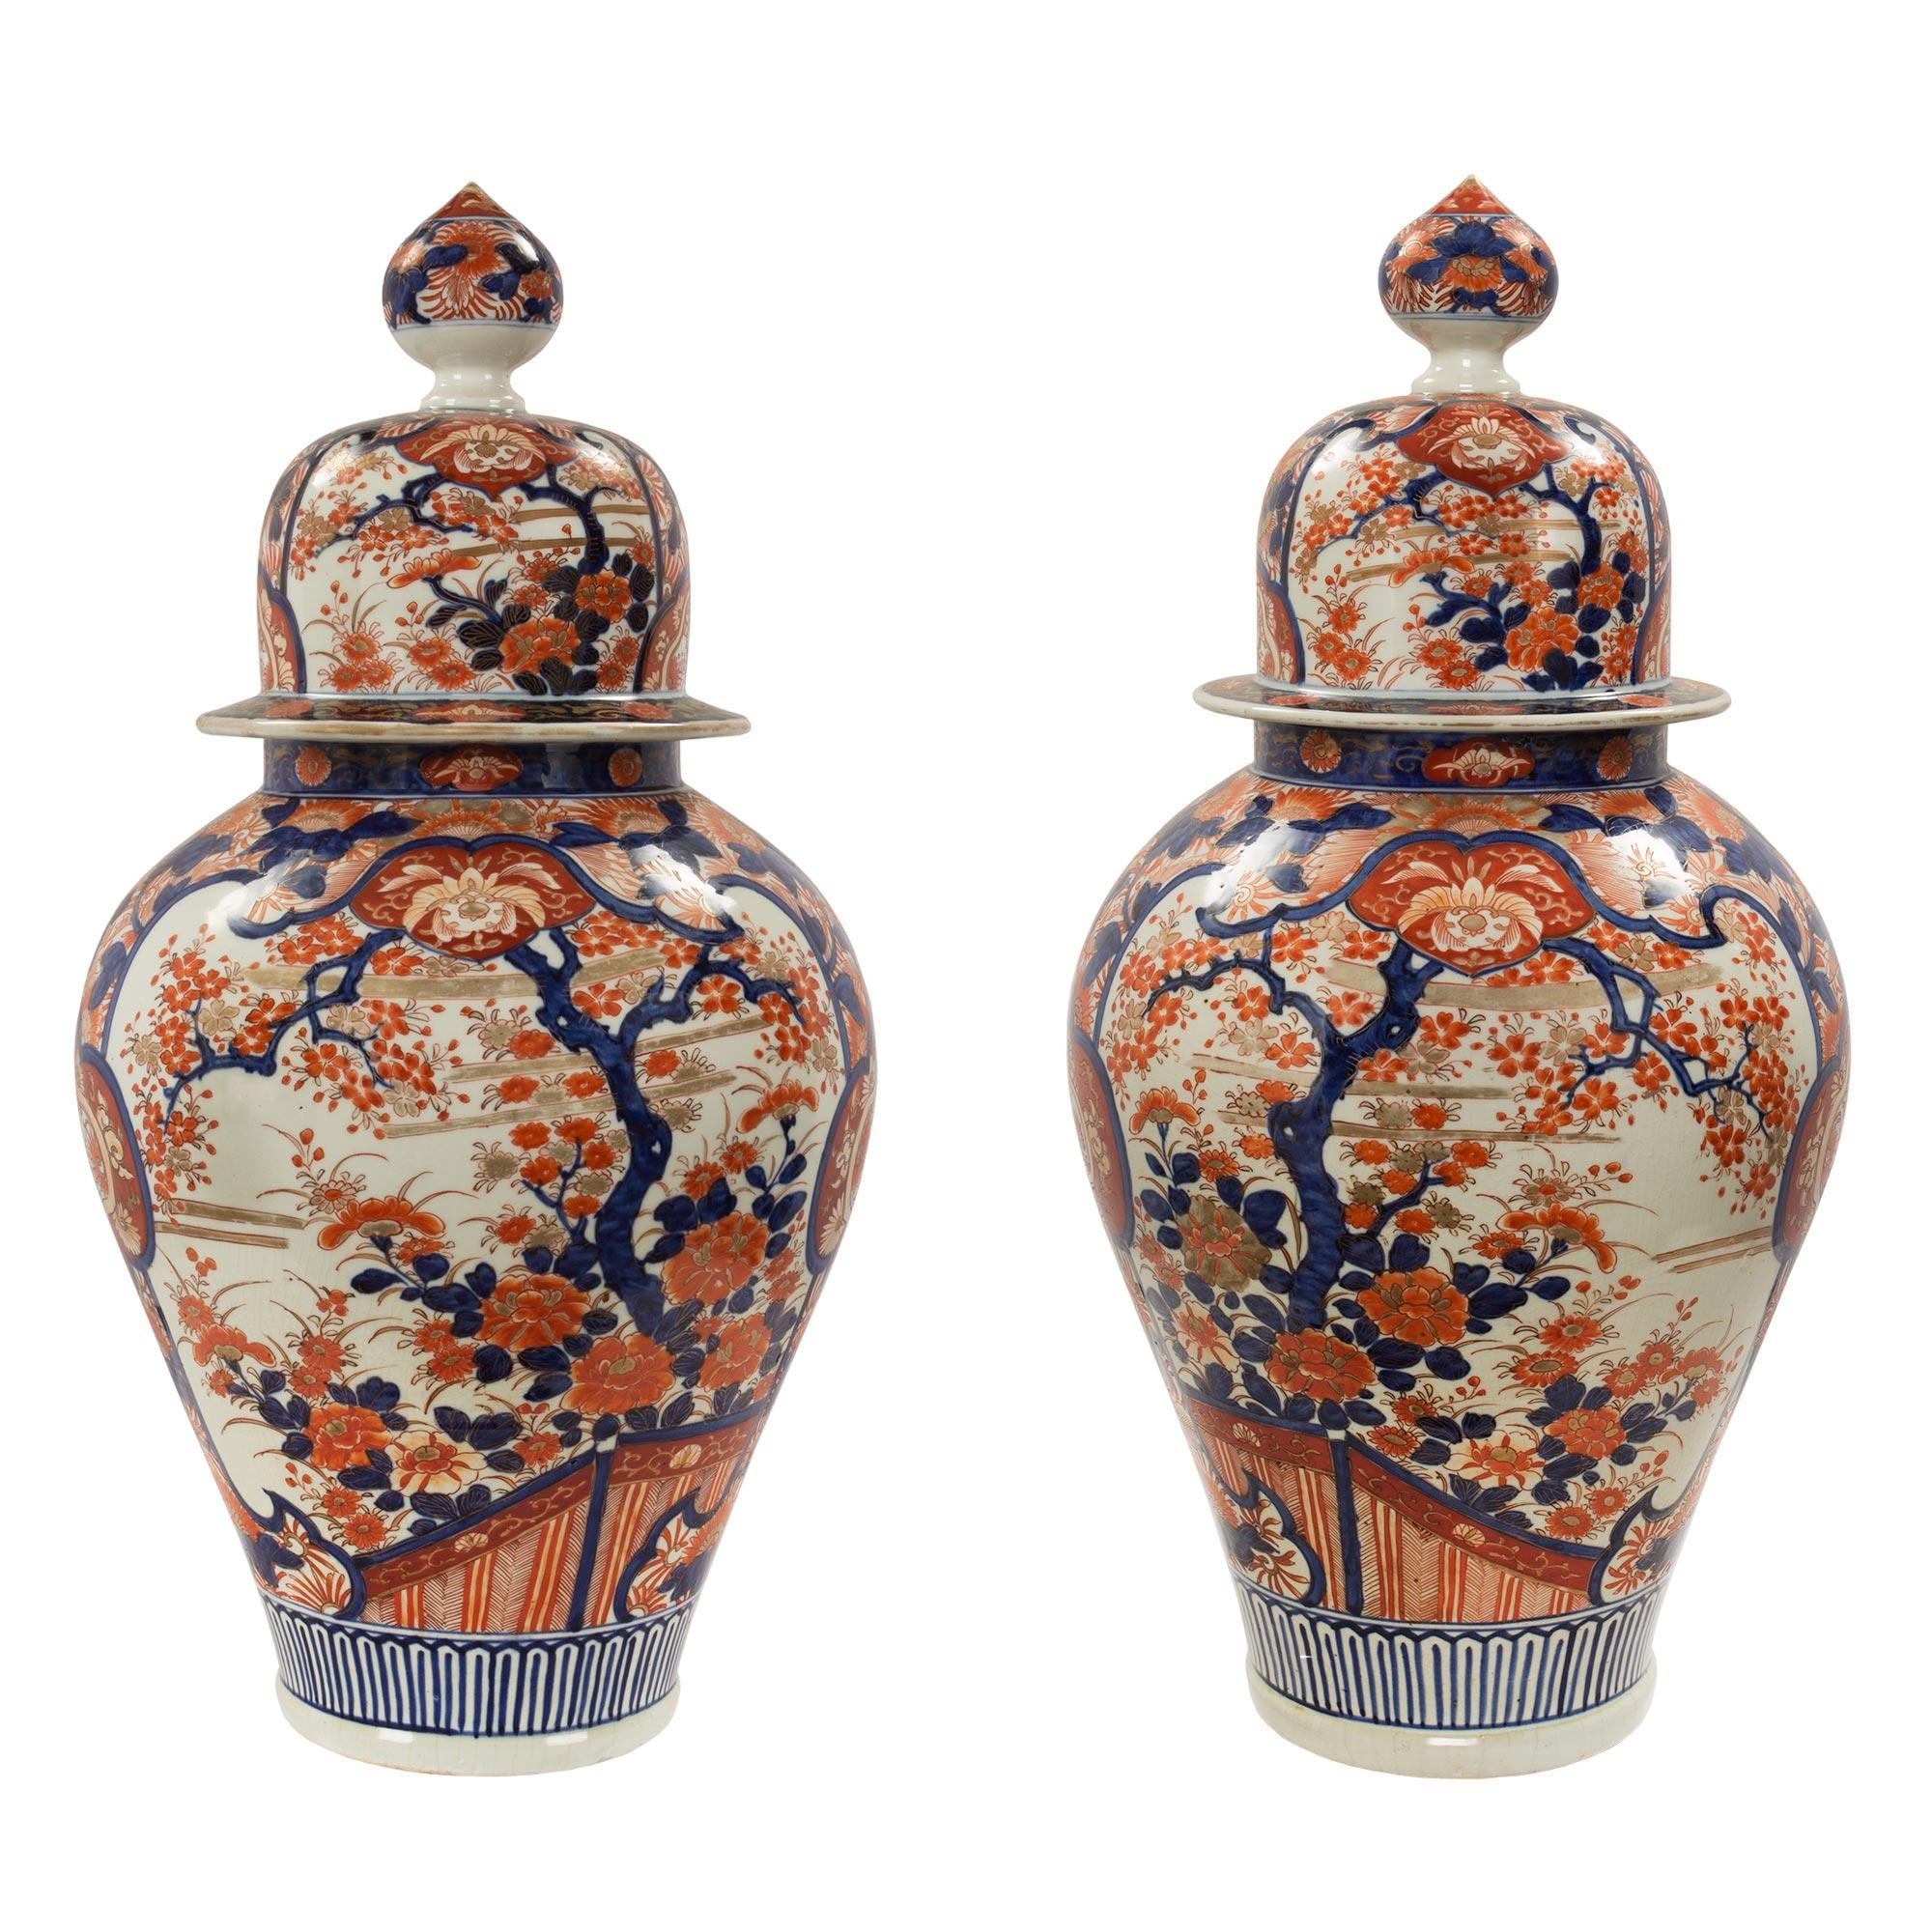 A pair of beautiful and large scale Japanese 19th century Imari lidded urns. Each urn displays most elegant traditional floral hand painted designs with finely detailed and most charming scenes. Above is the removable lid with a striking circular